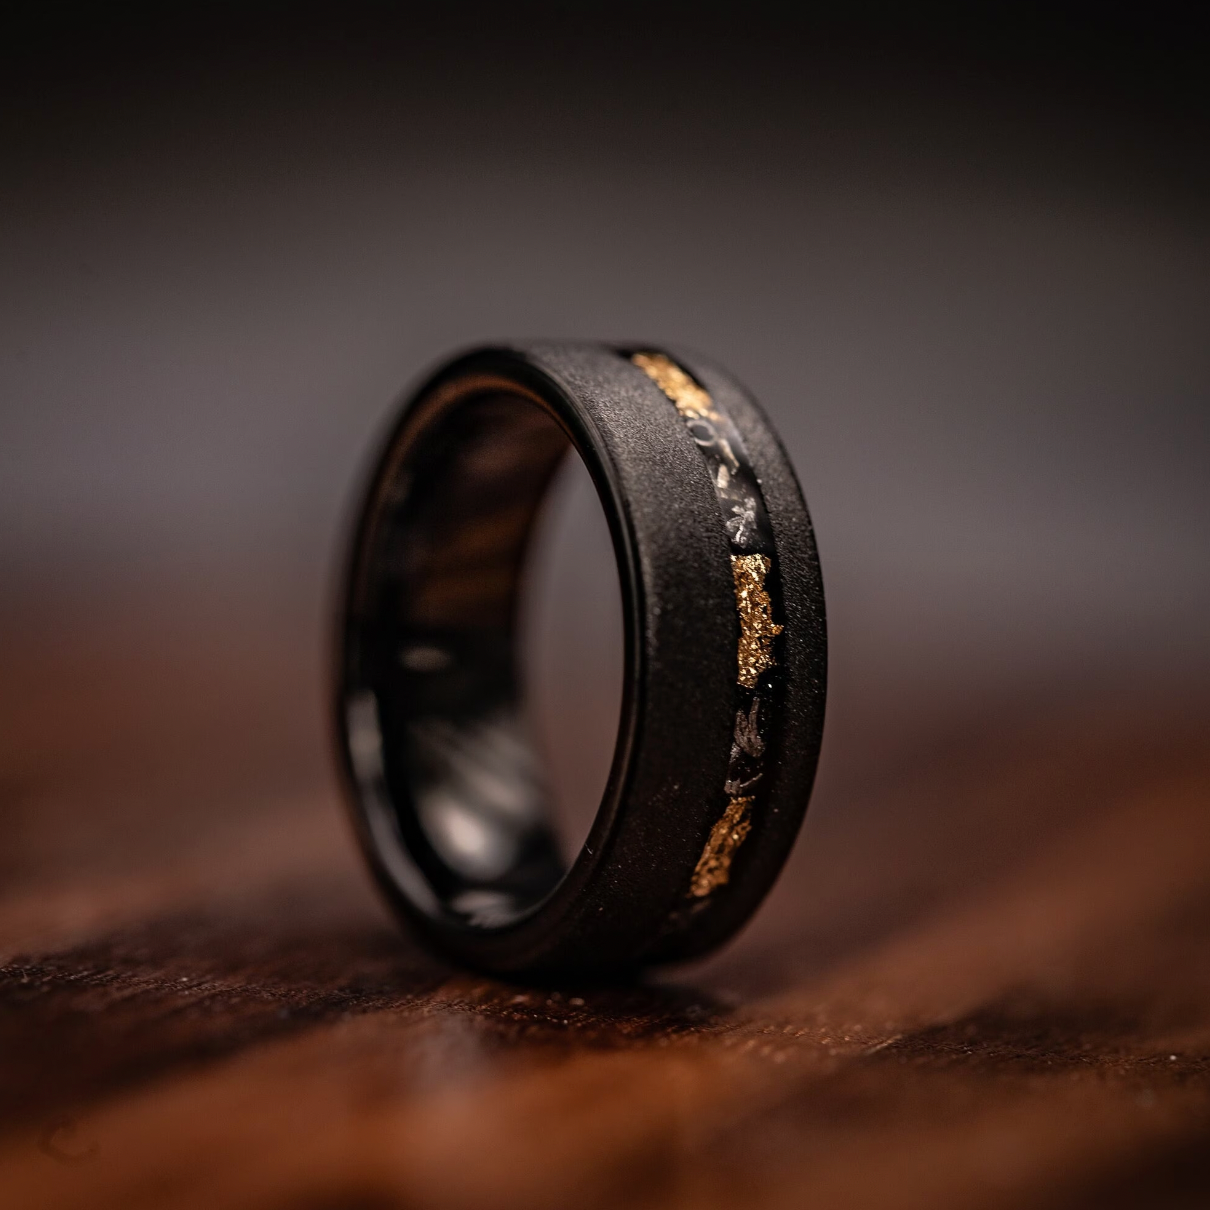 Handsome men's wedding band featuring black and gold accents, accented with meteorite and sandblasted finish.